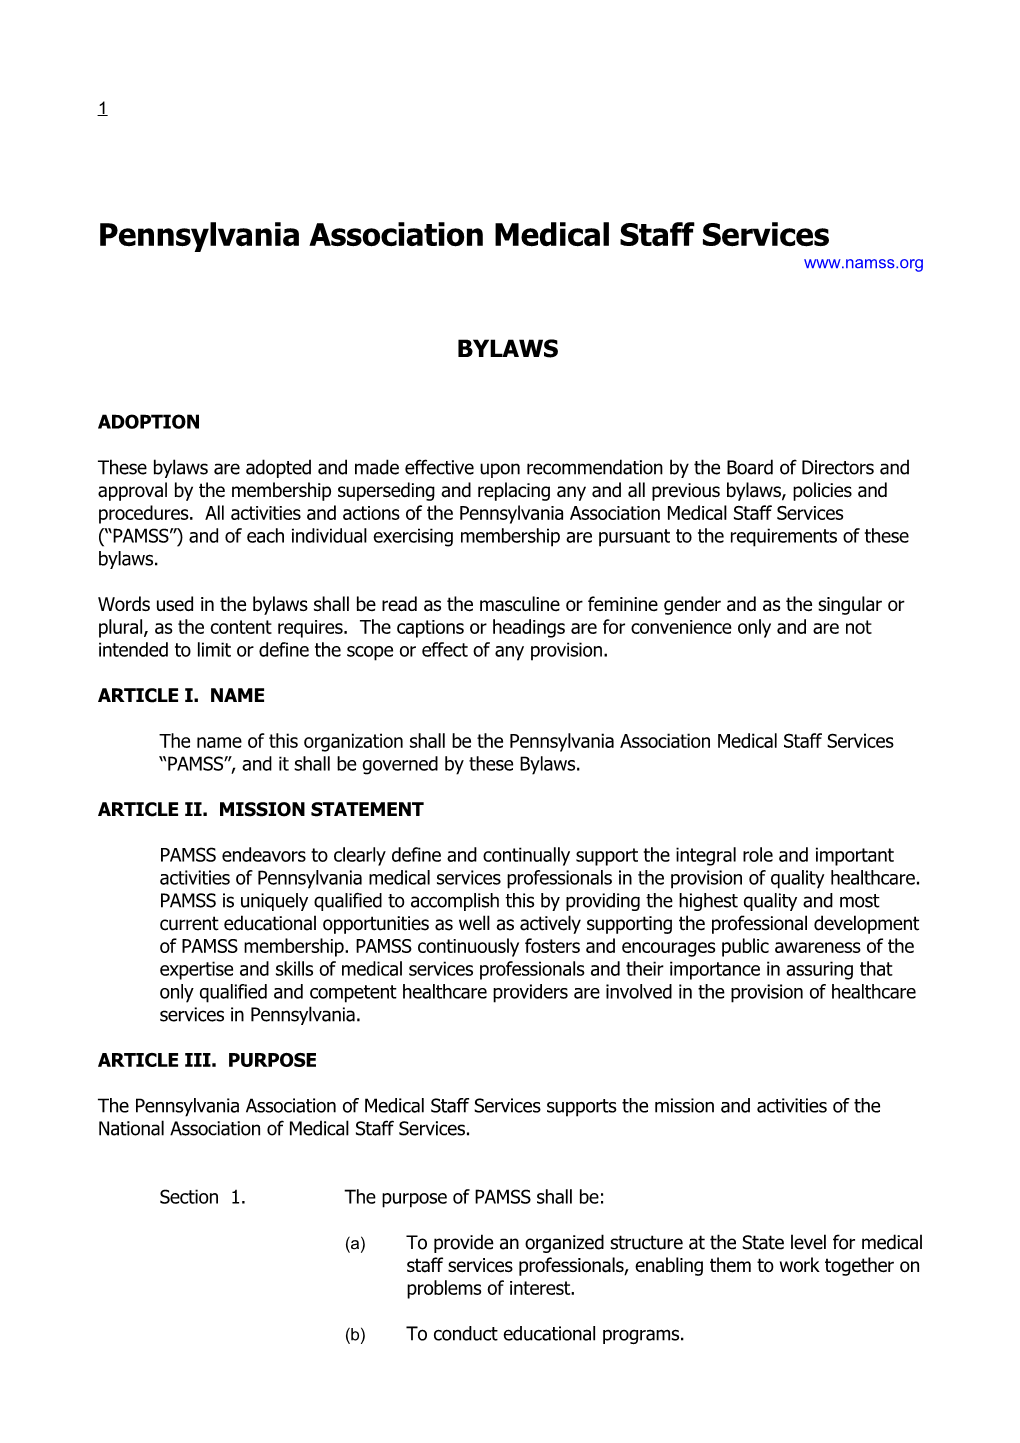 Bylaws of the Pennsylvania Association Medical Staff Services